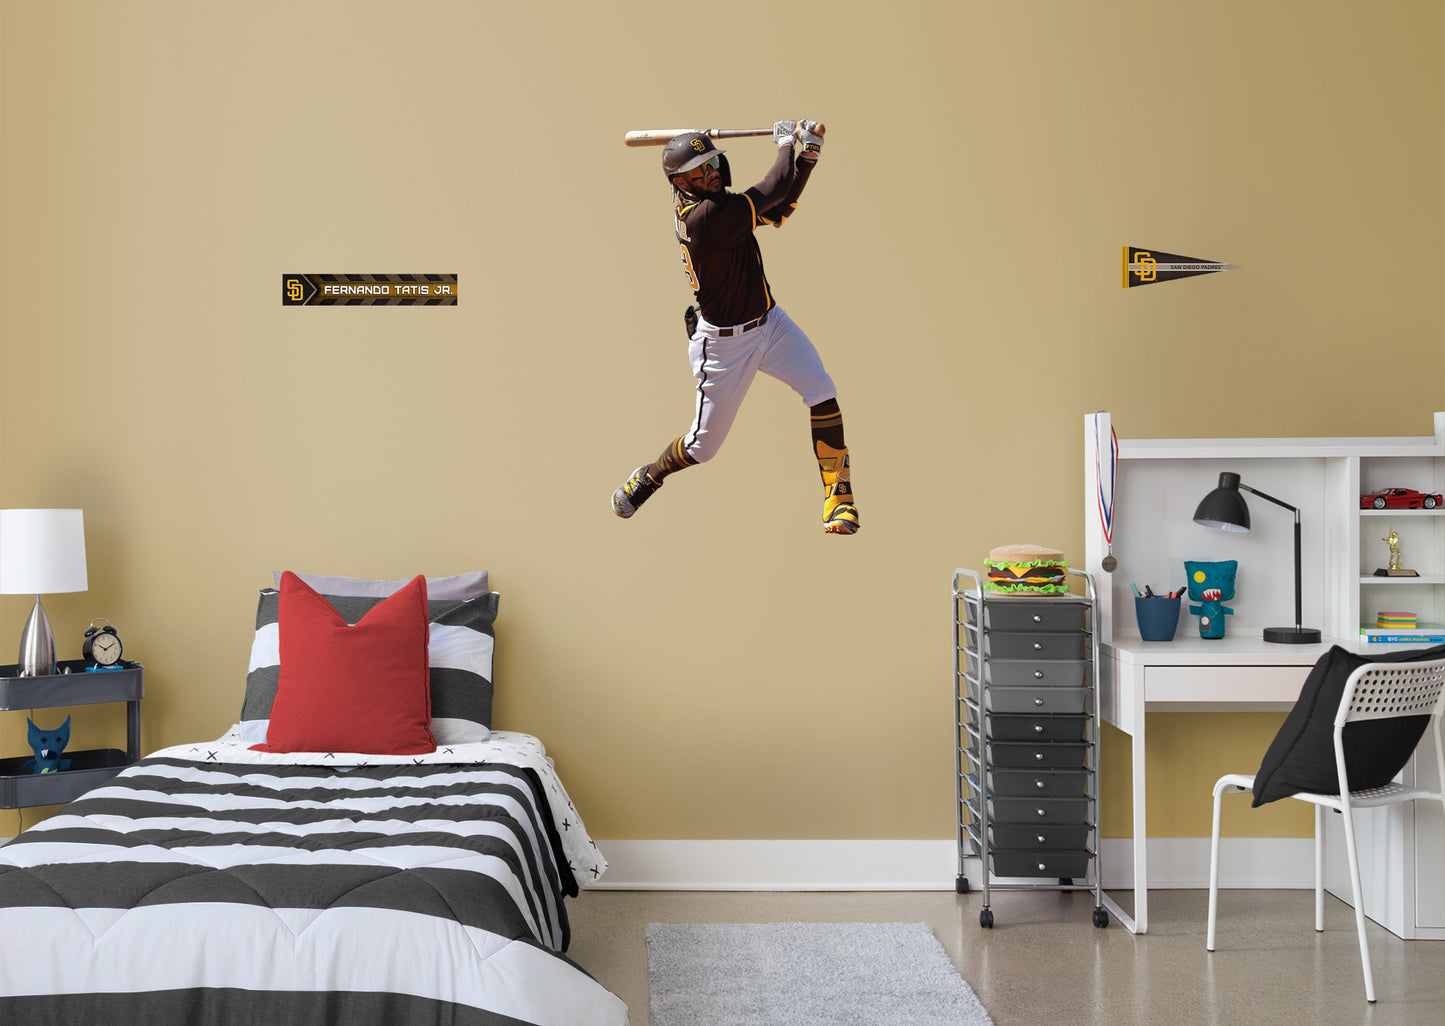 San Diego Padres Fernando Tatis Jr.         - Officially Licensed MLB Removable Wall   Adhesive Decal